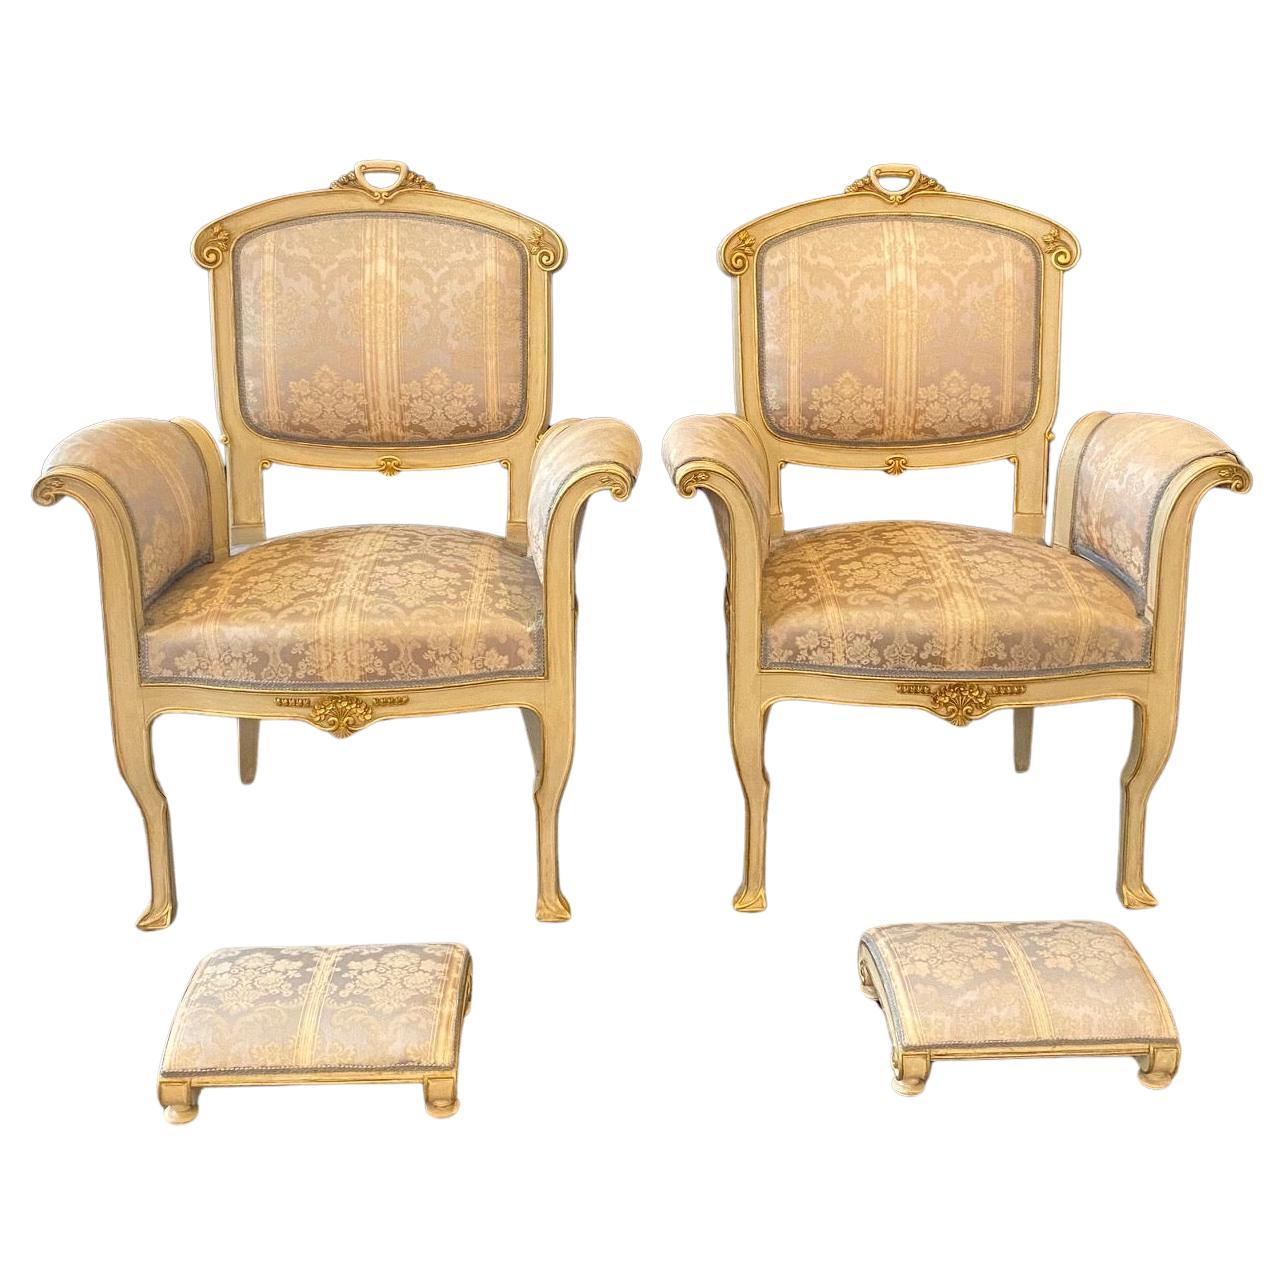 Pair of Italian Gold Gilt and Cream Art Nouveau Club Chairs with Footstools 